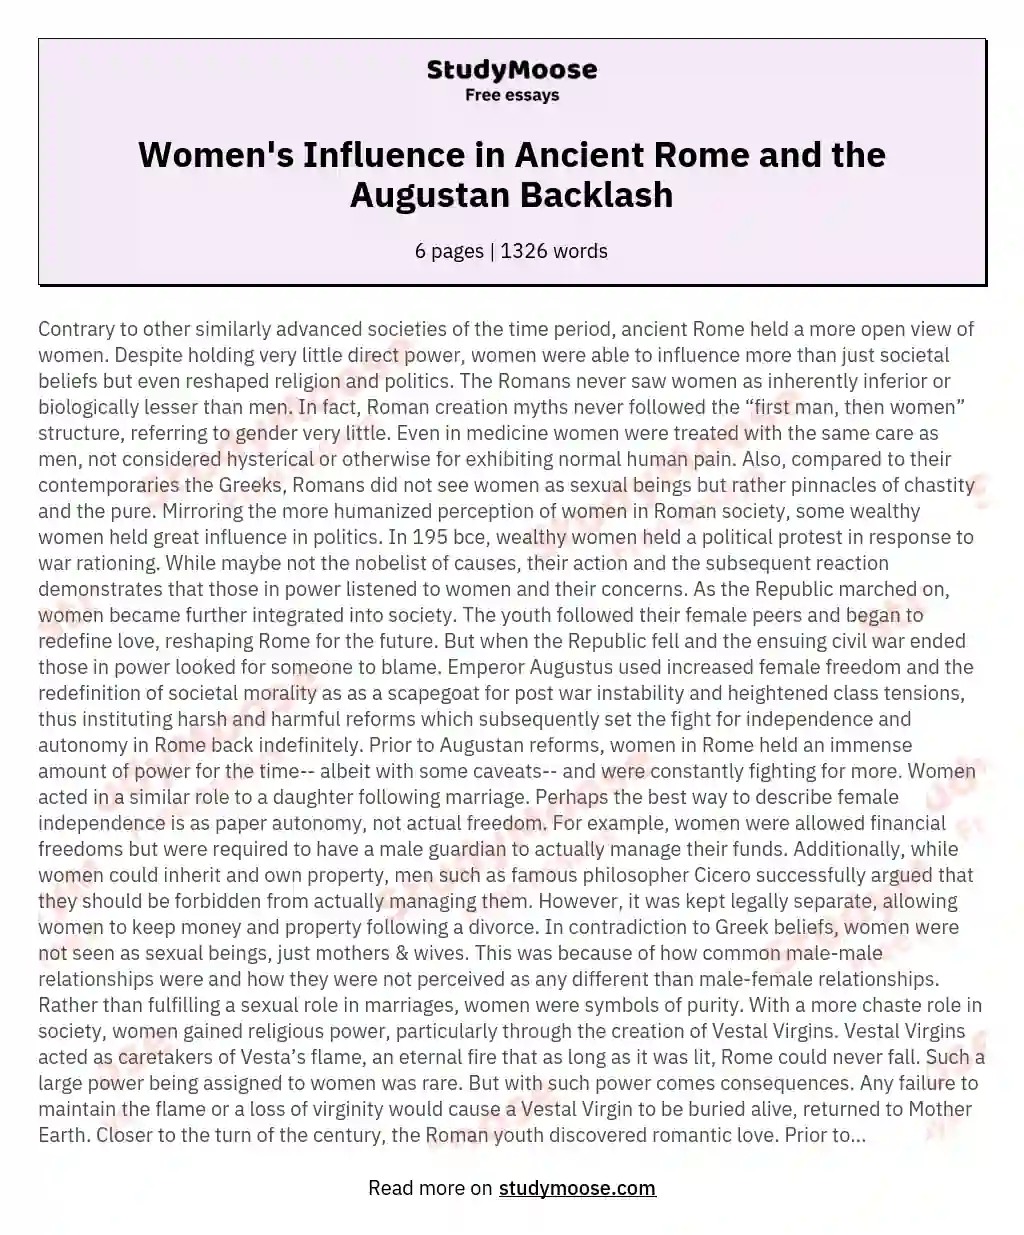 Women's Influence in Ancient Rome and the Augustan Backlash essay